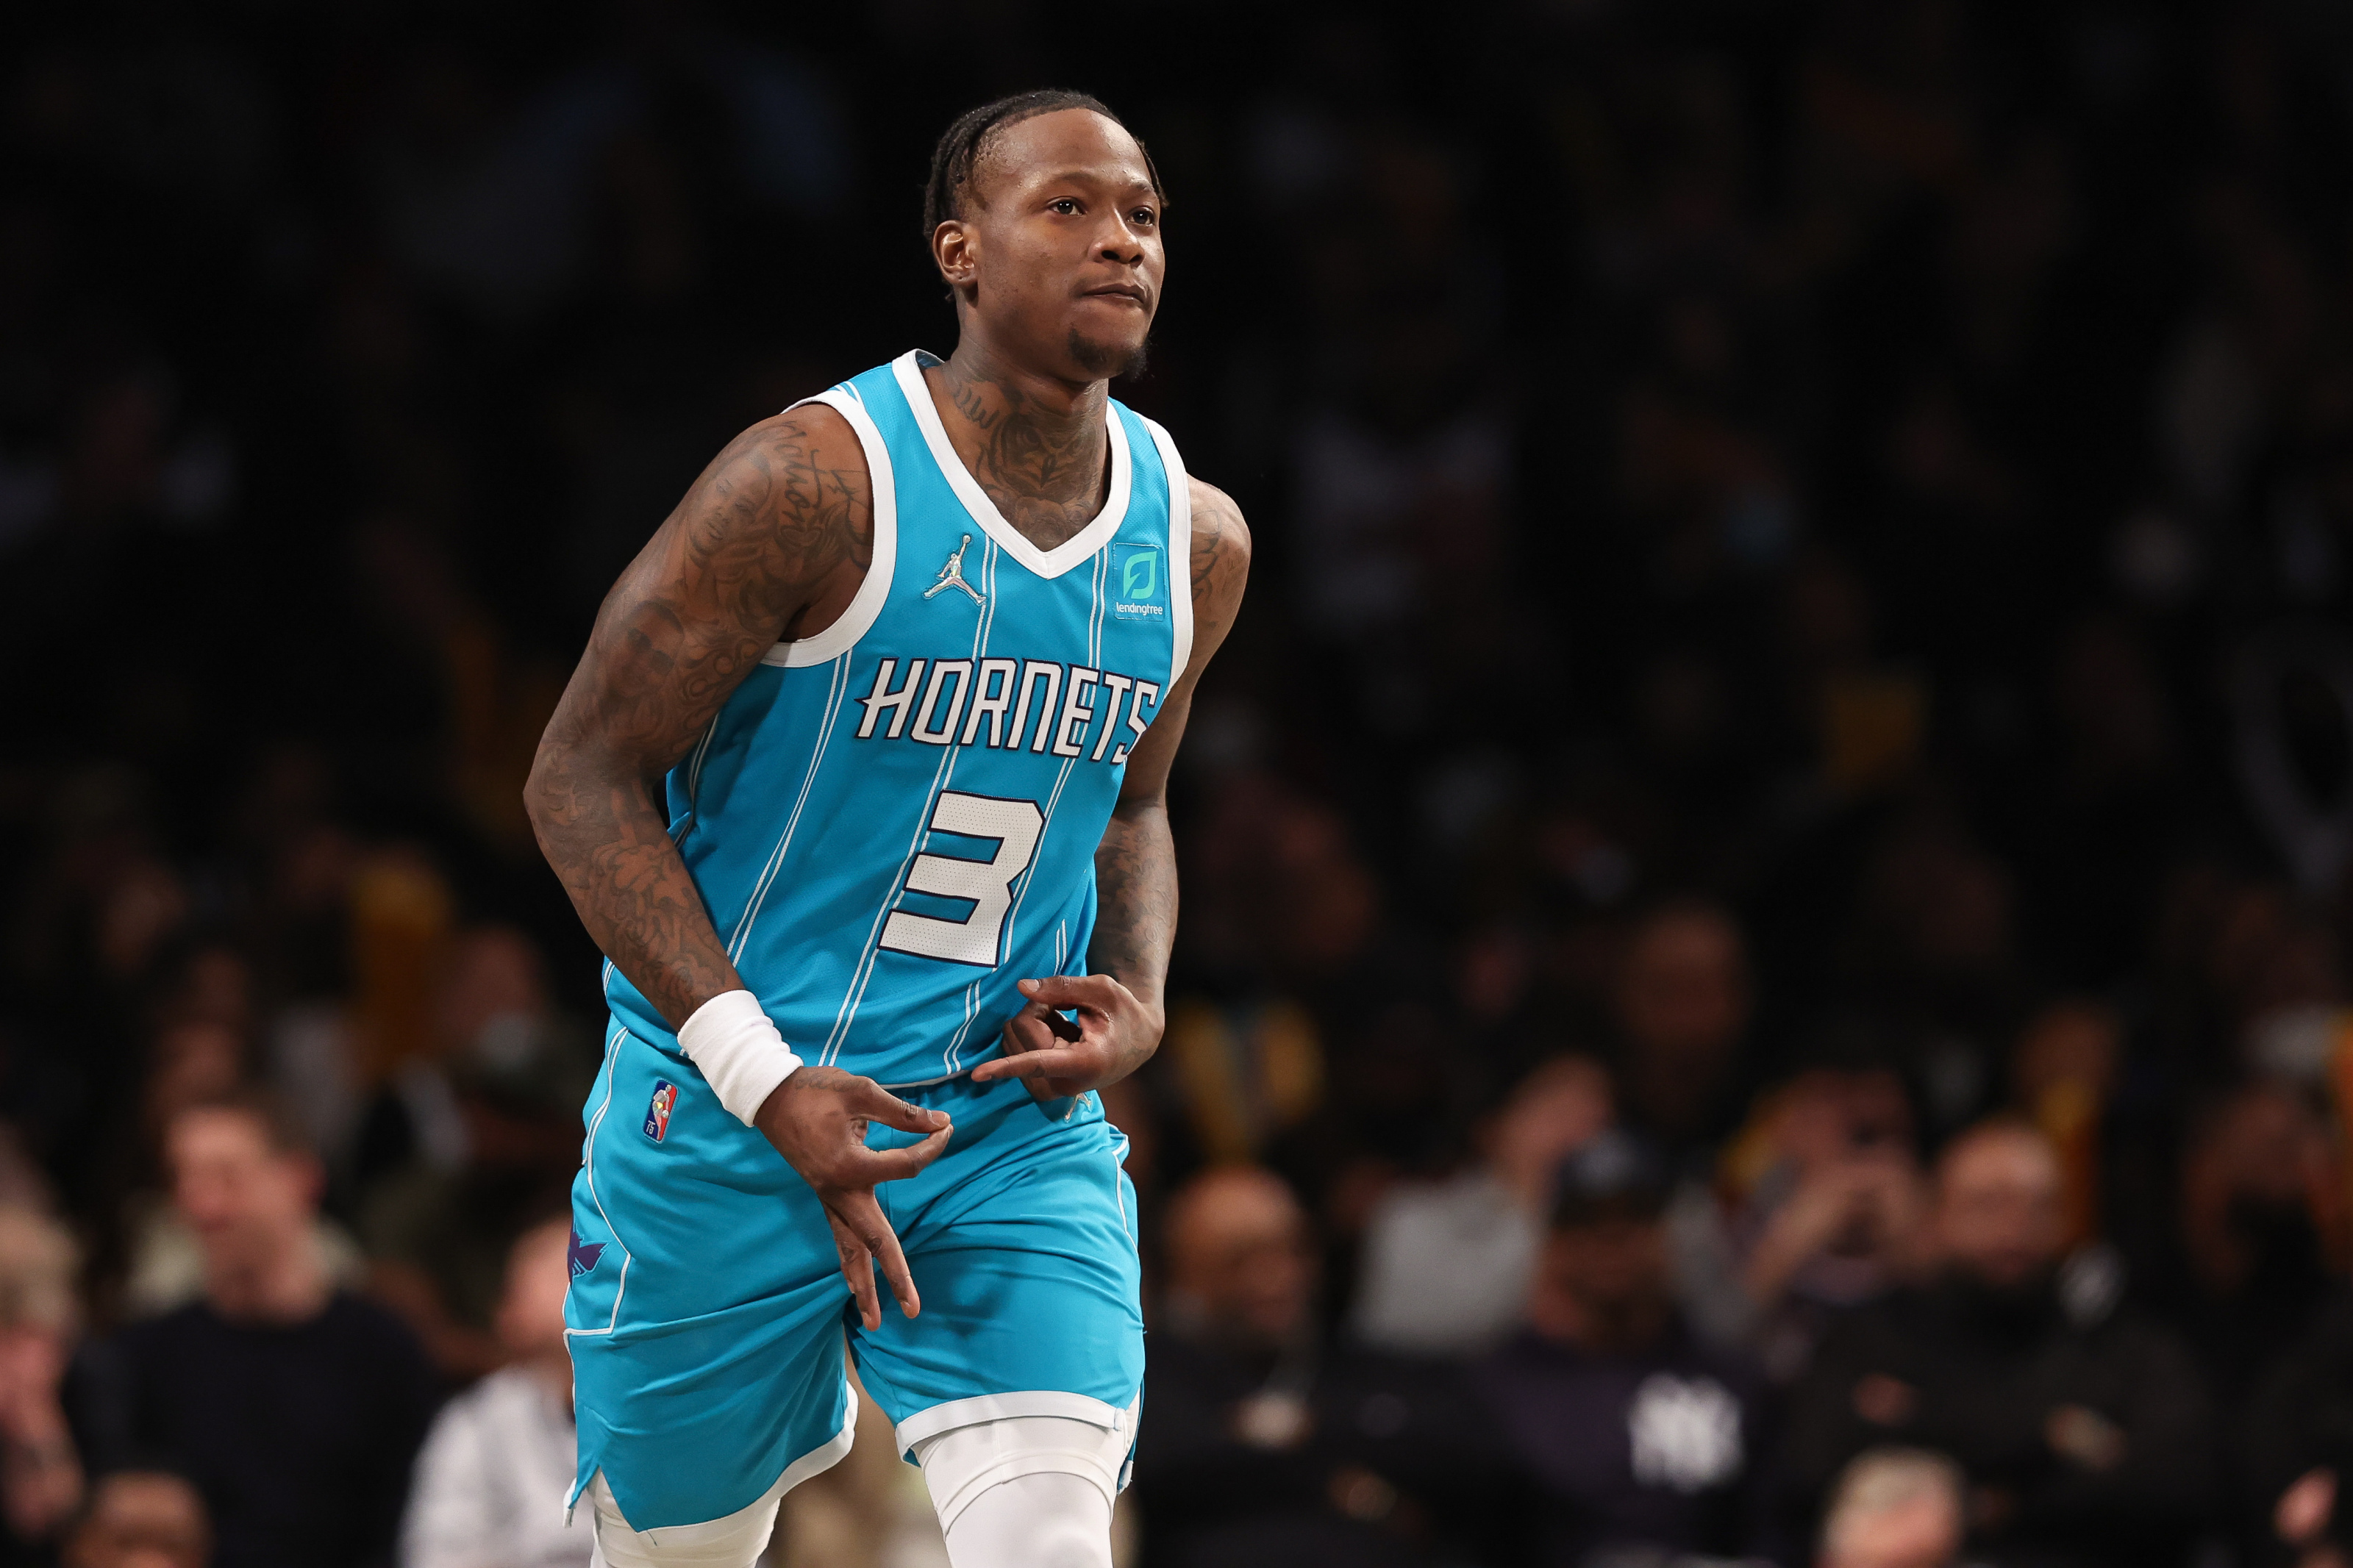 Terry Rozier shines as Hornets beat Thunder 134-116